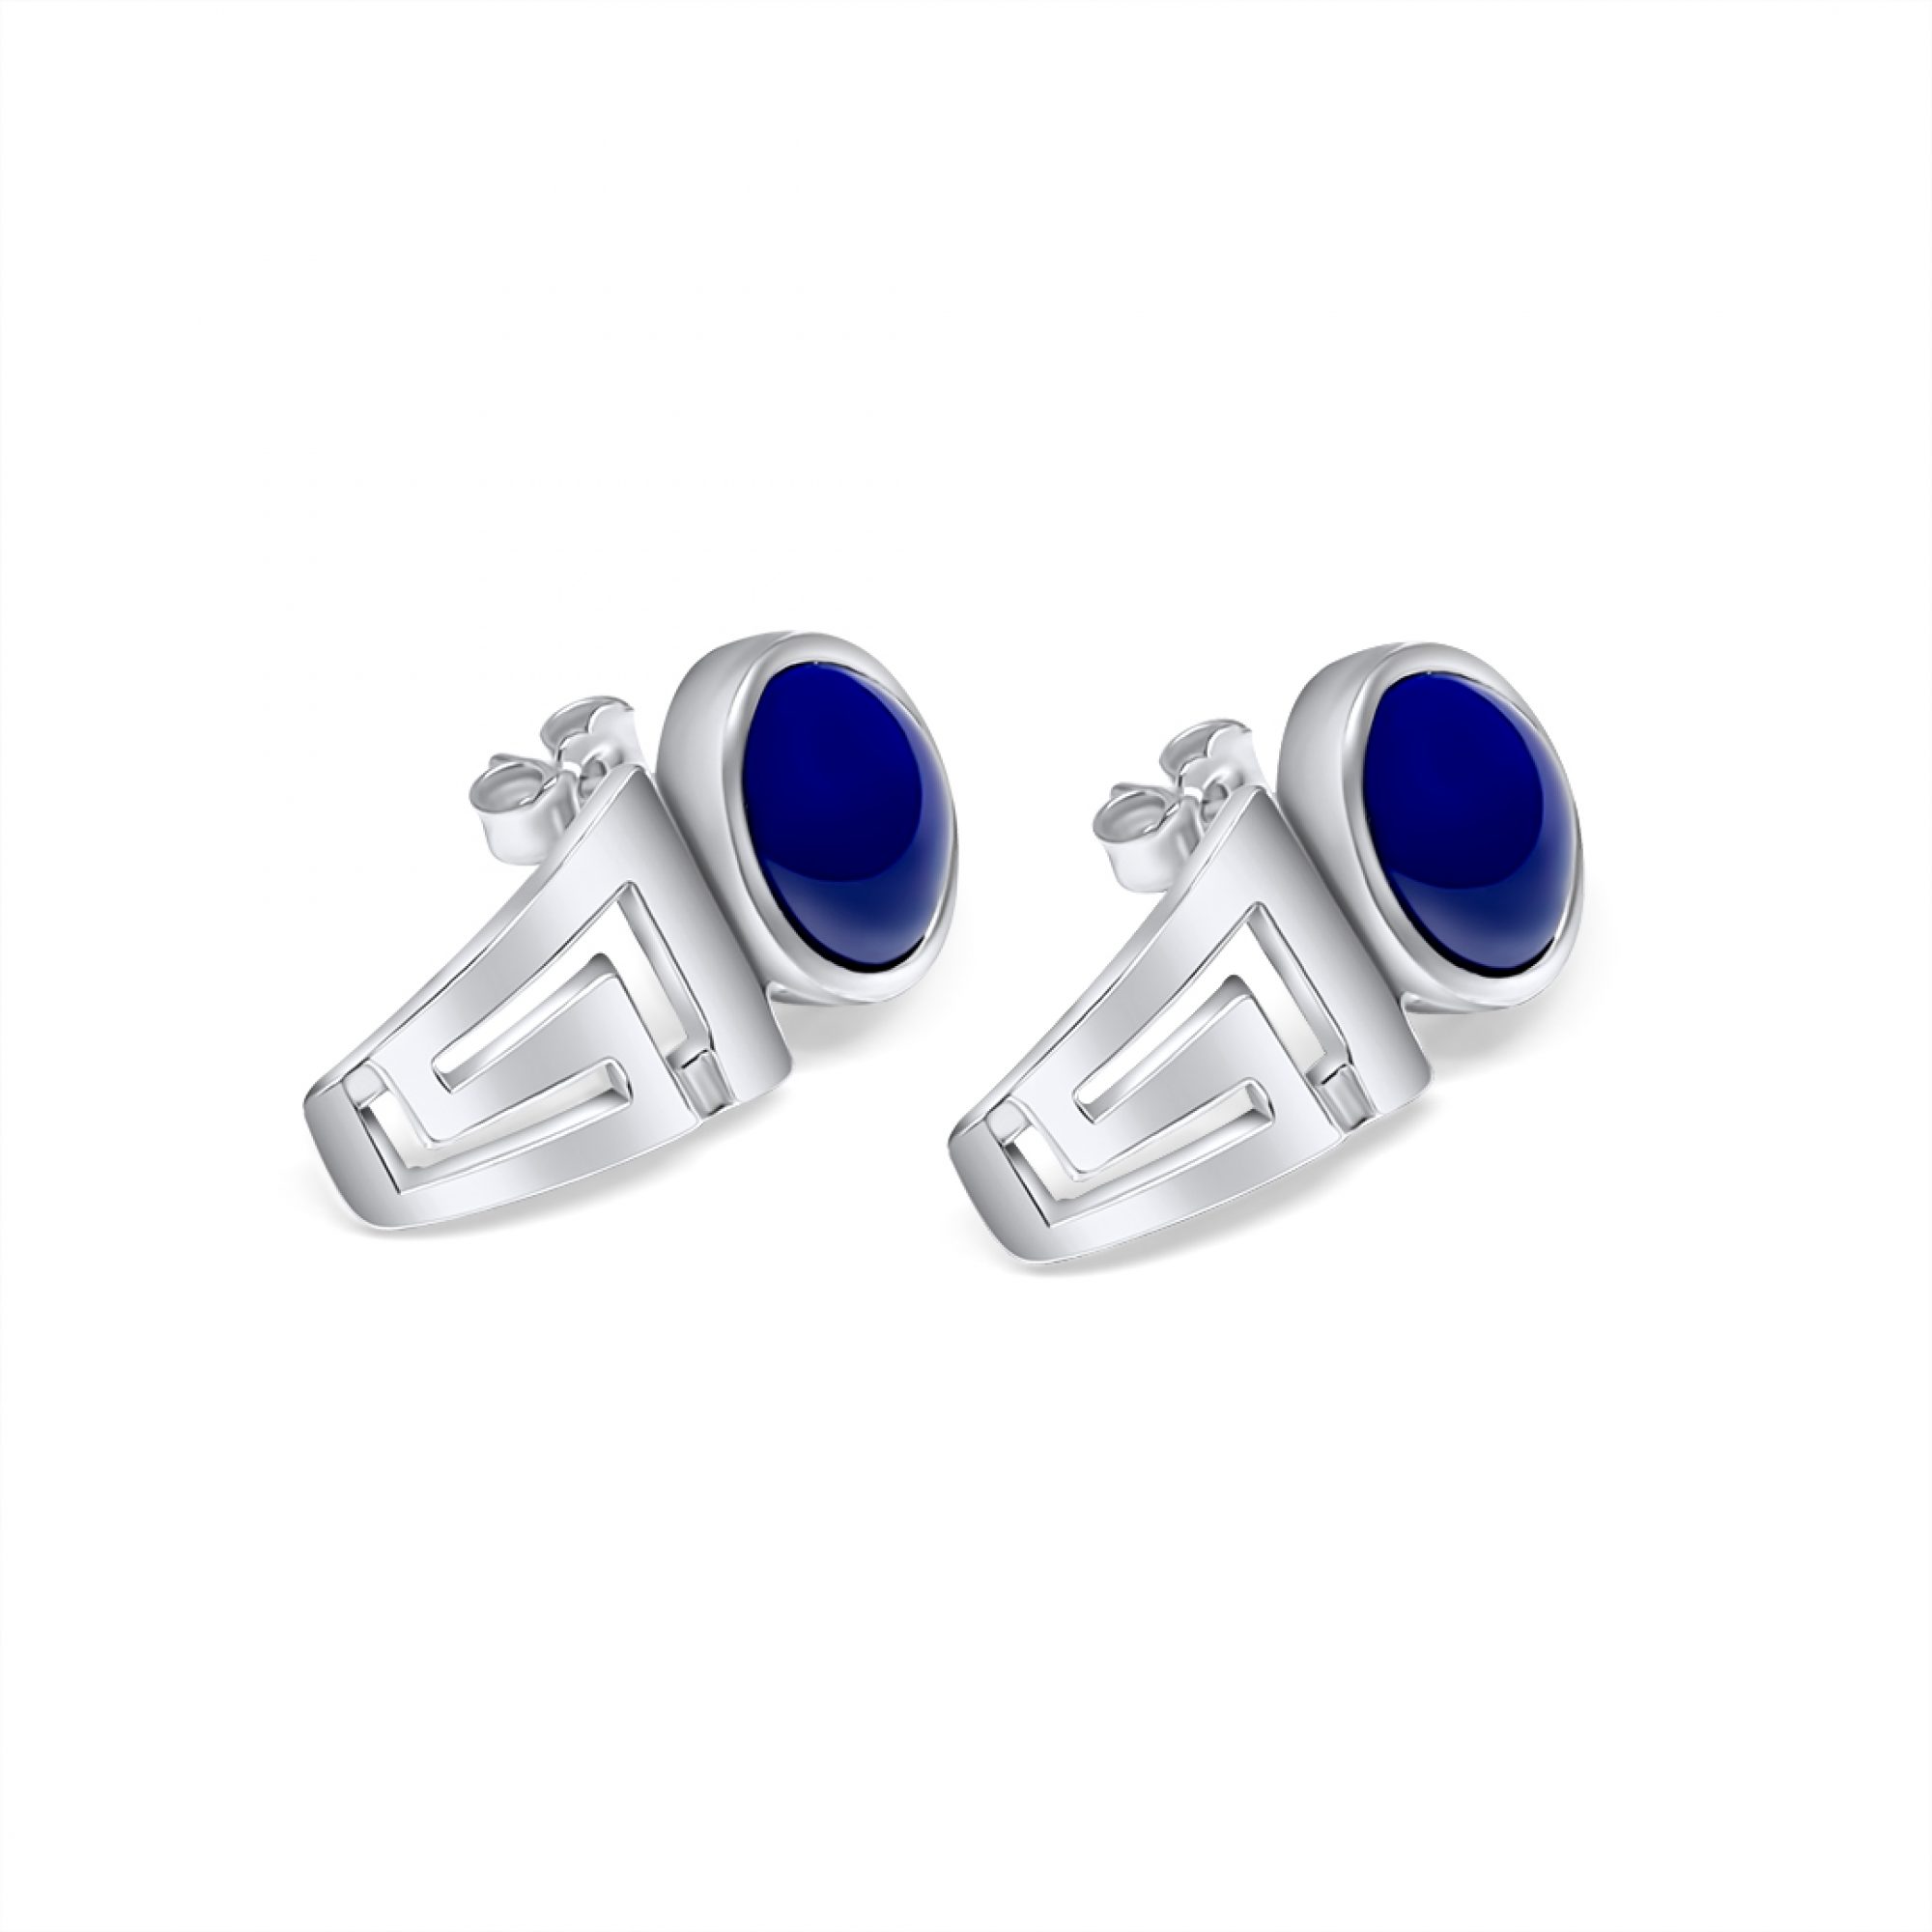 Meander earrings with lapis lazuli stones